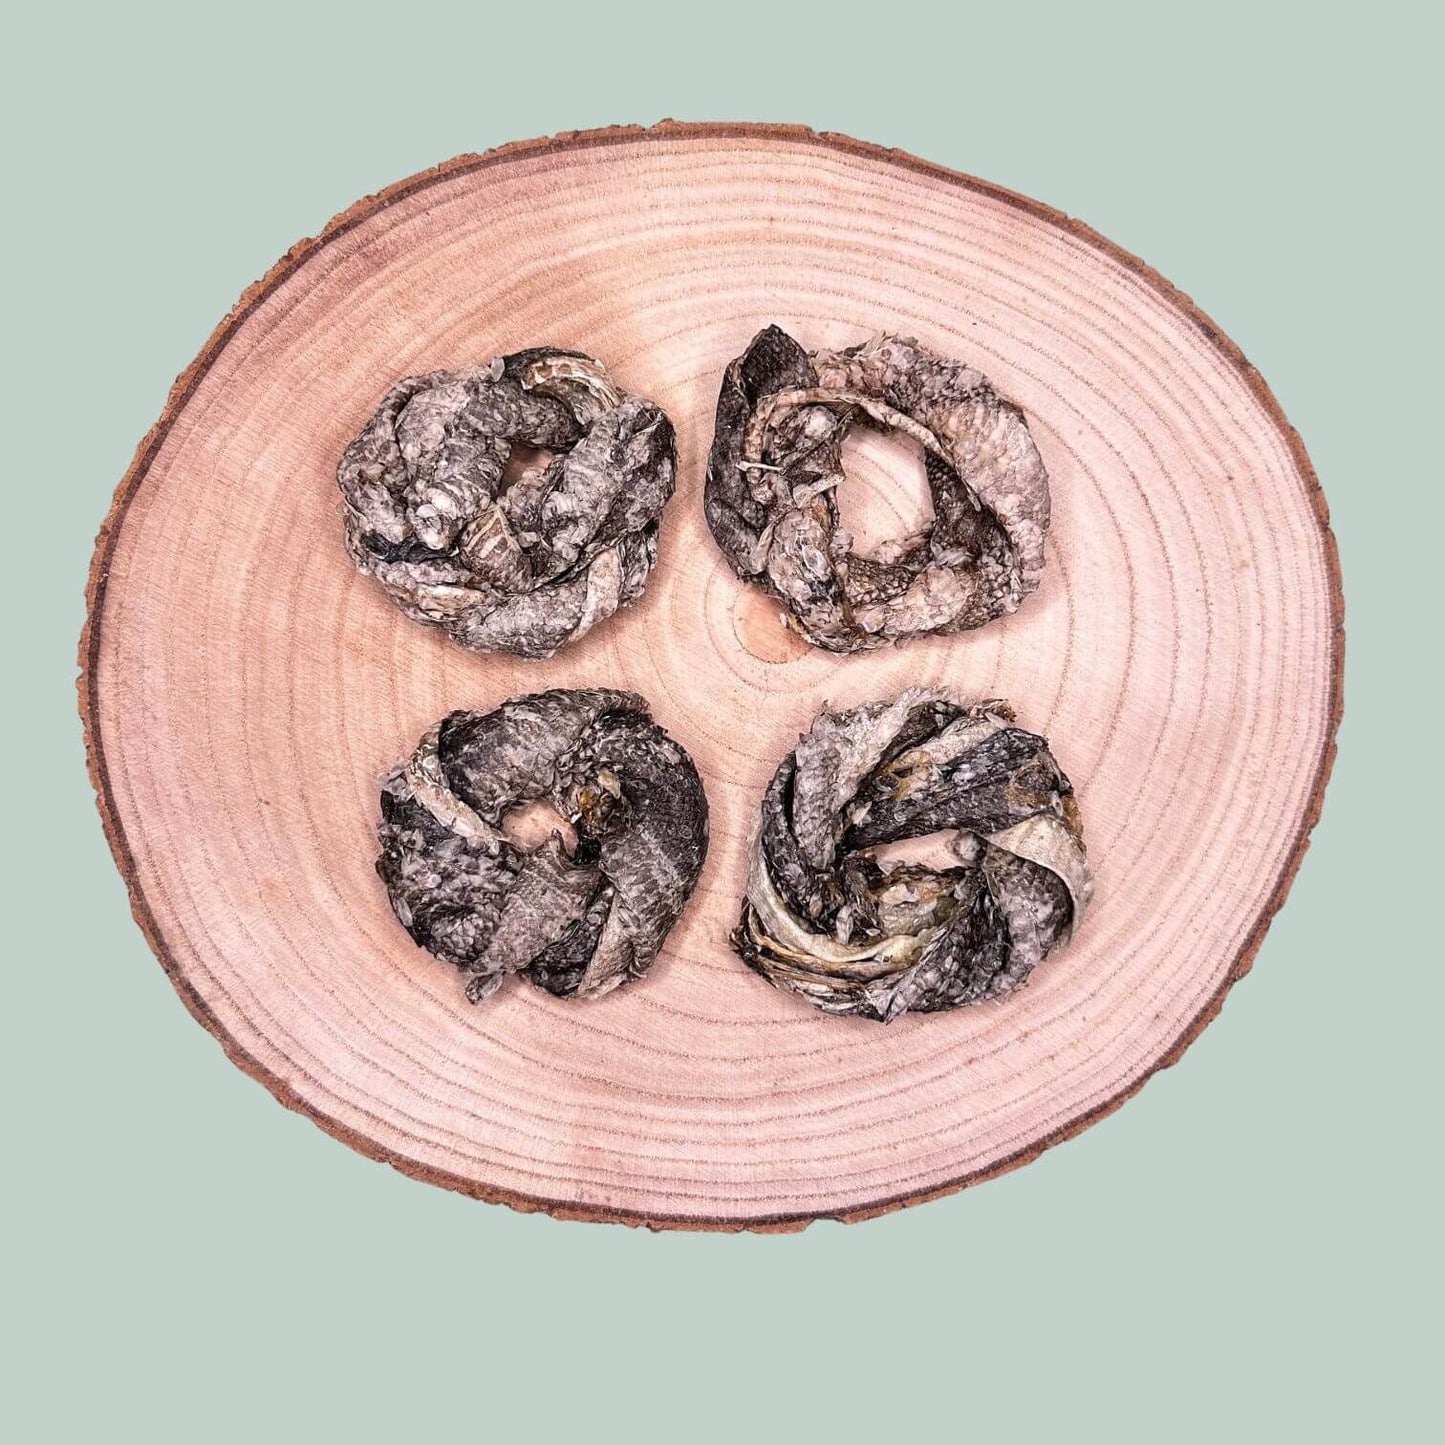 Dried doughnut ring natural dog treats made of cod skin as a healthy natural treat for dogs and puppies